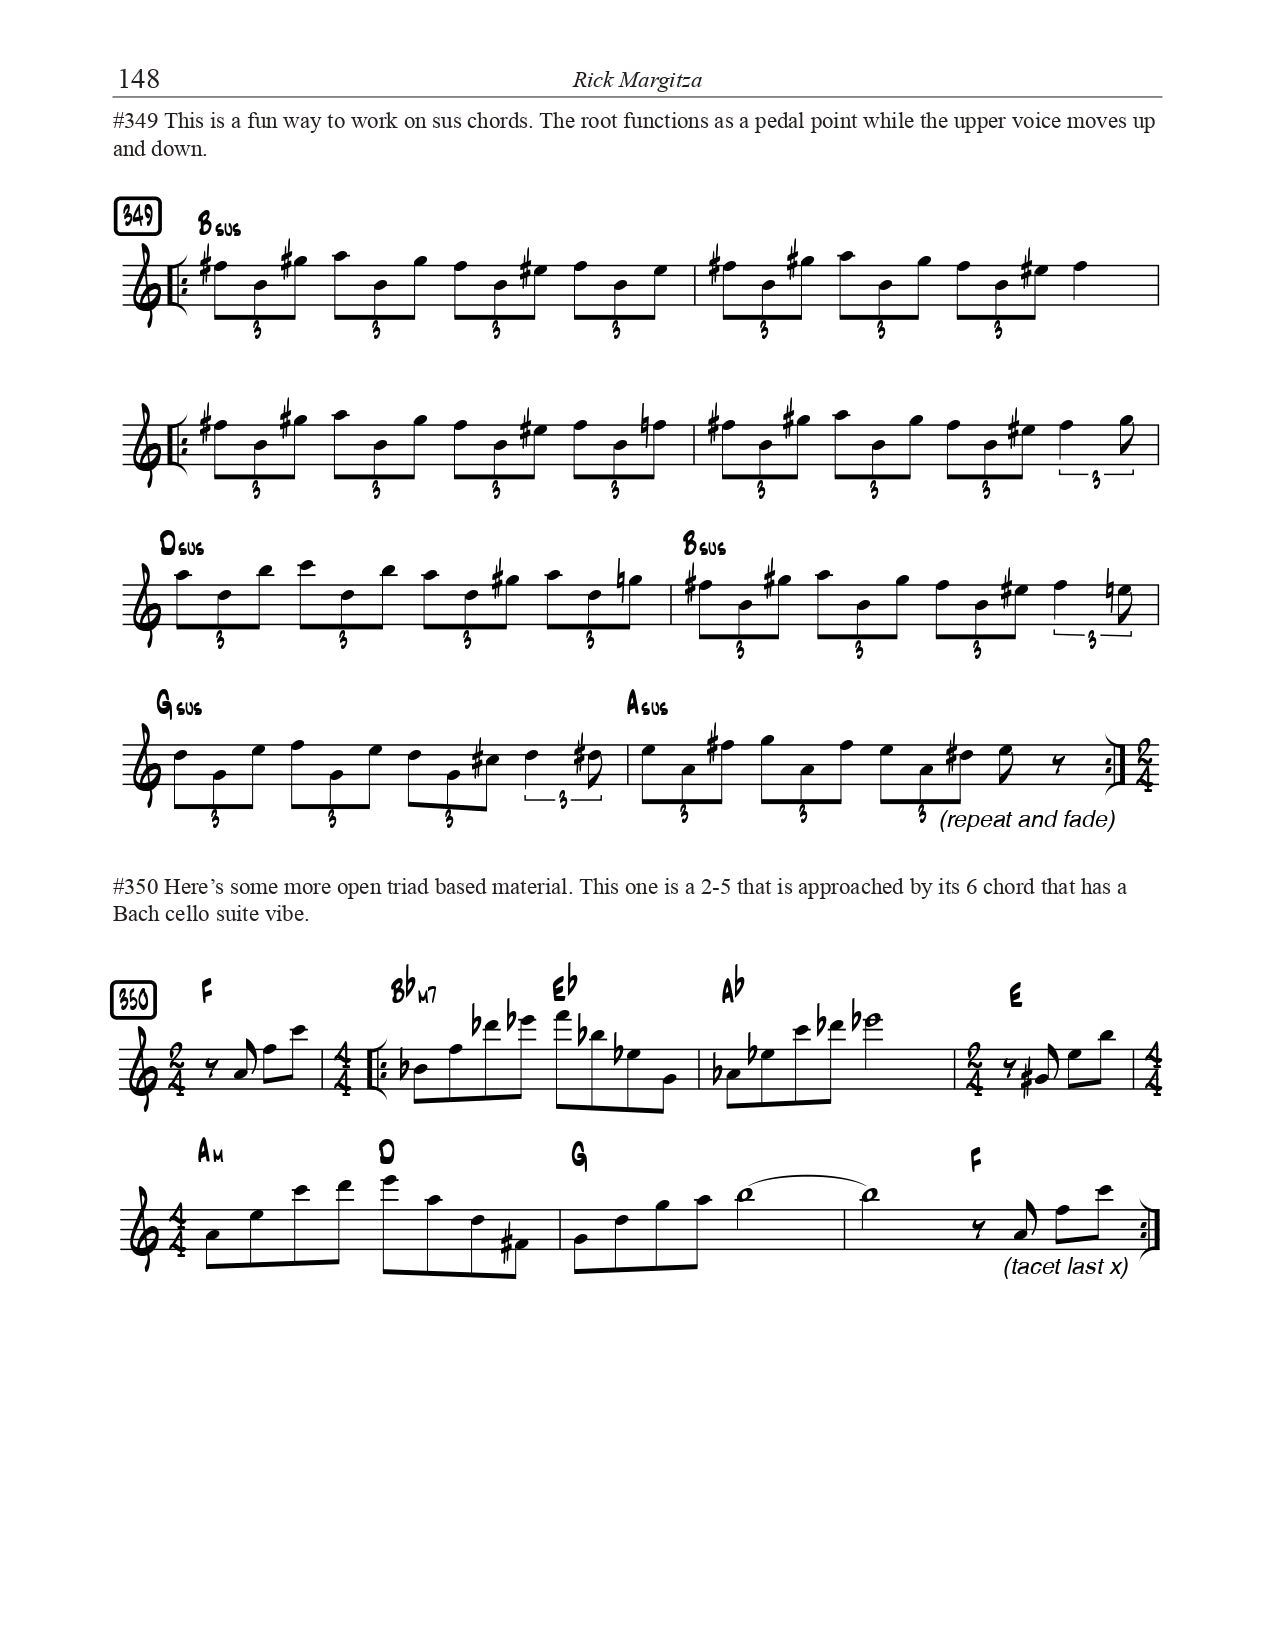 365 Days of Practice - A High Level Guide to Practicing From A Jazz Master Book